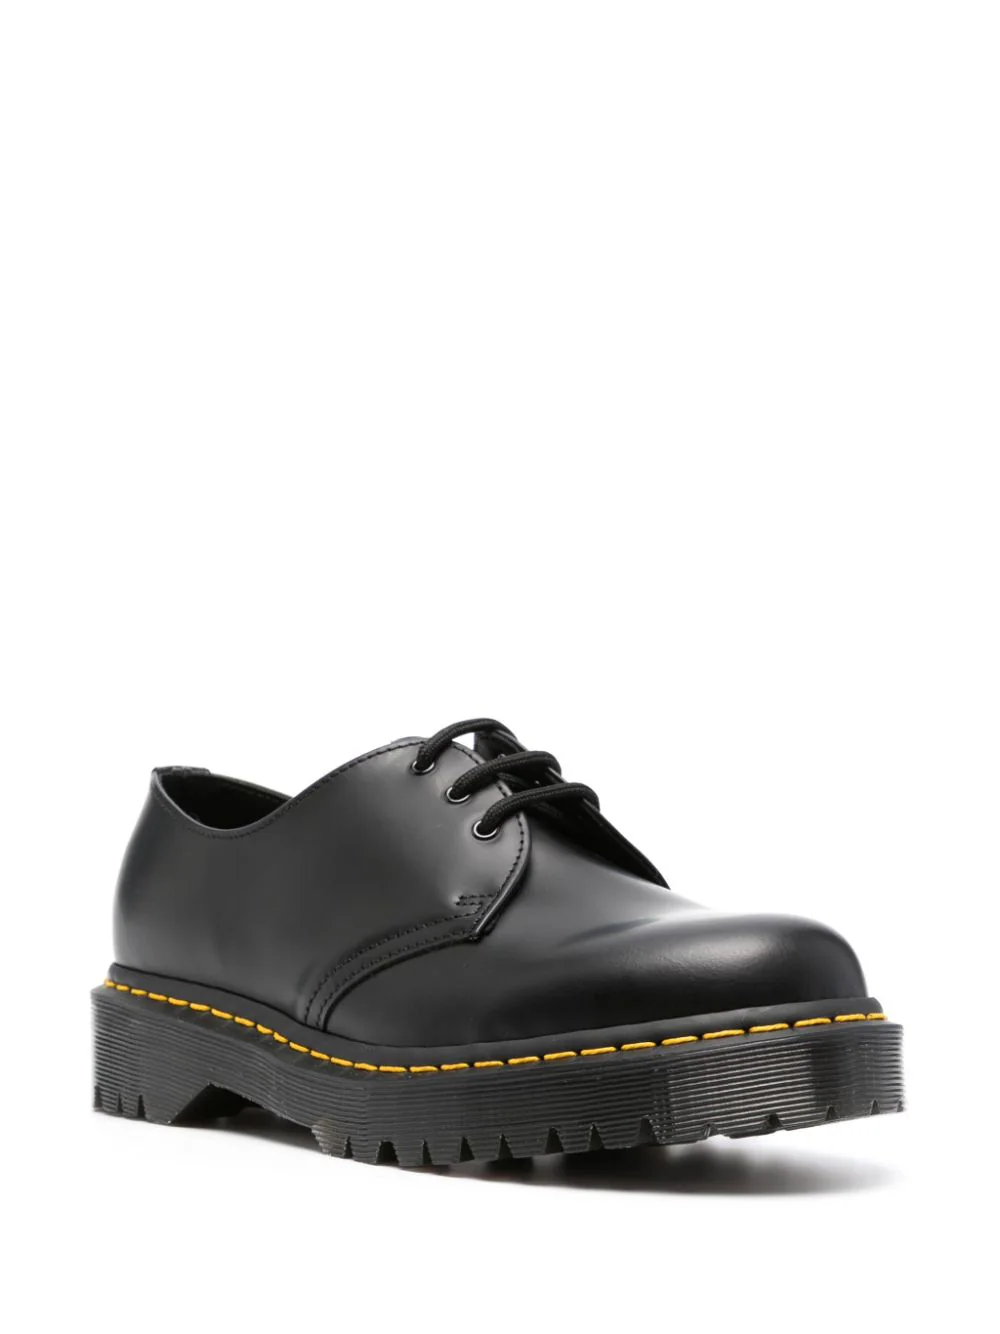 DR. MARTENS 1461 Bex Smoother Leather Oxford Shoes